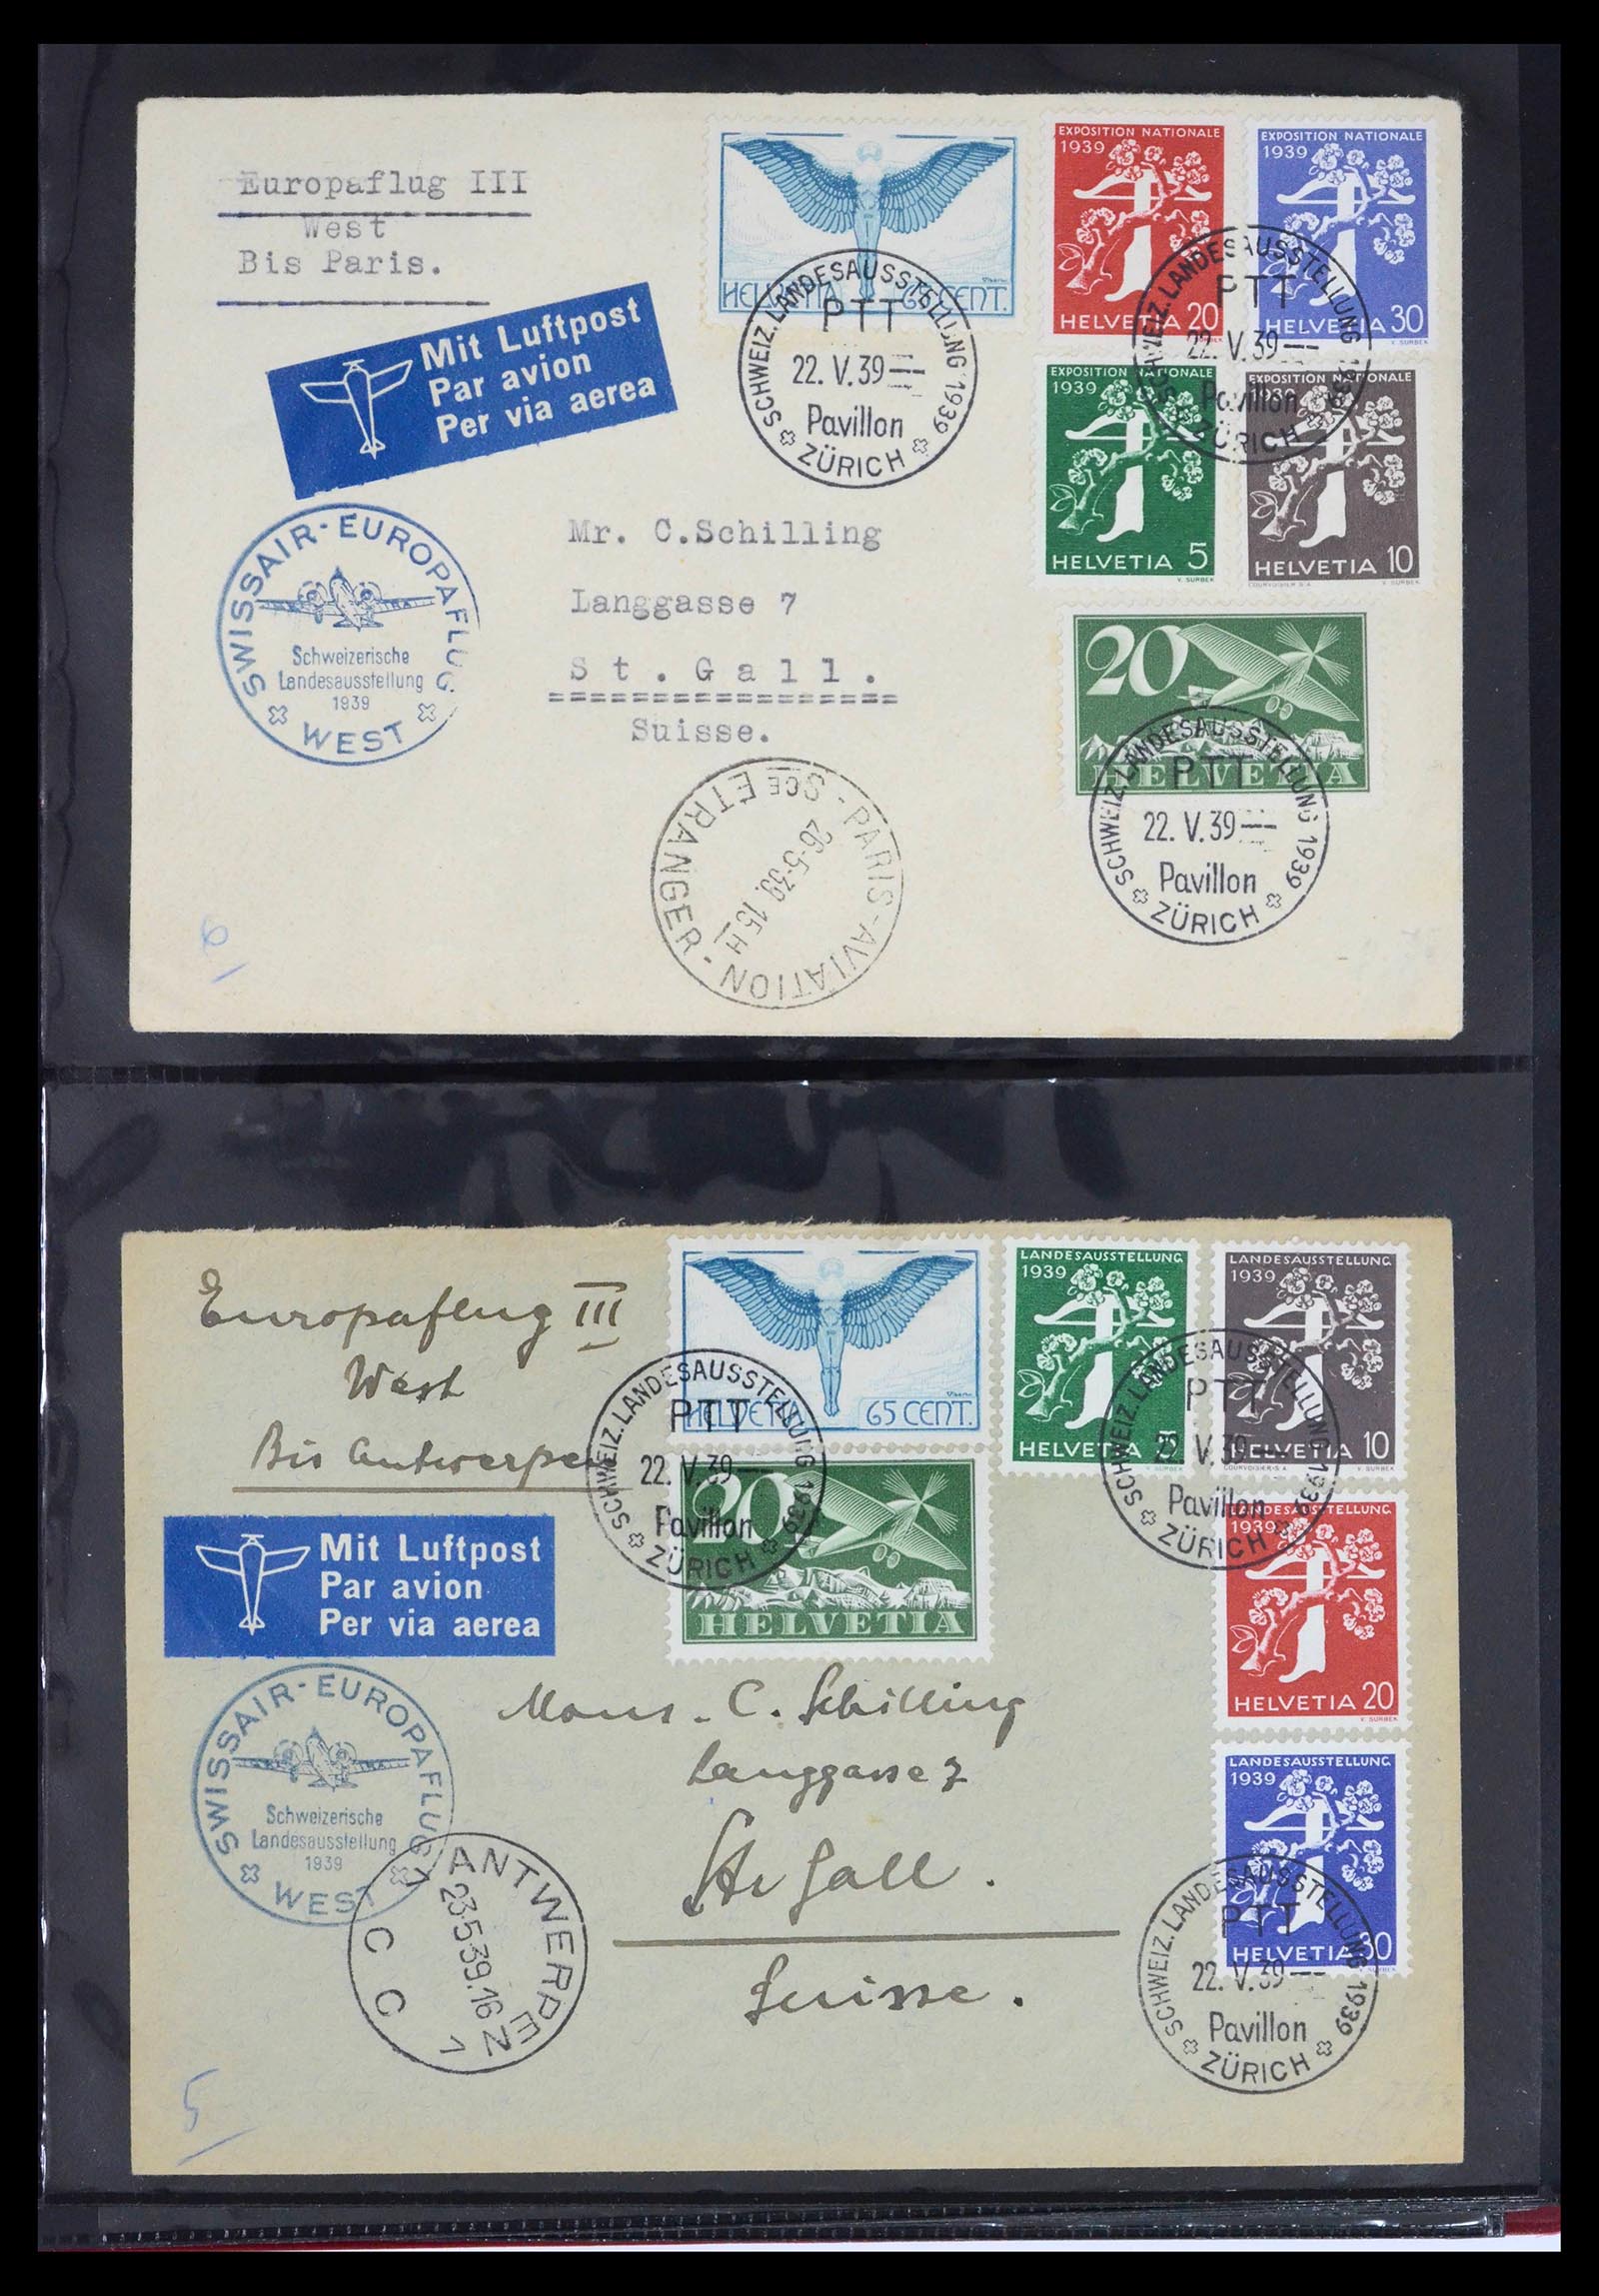 39533 0020 - Stamp collection 39533 Zwitserland airmail covers 1925-1960.